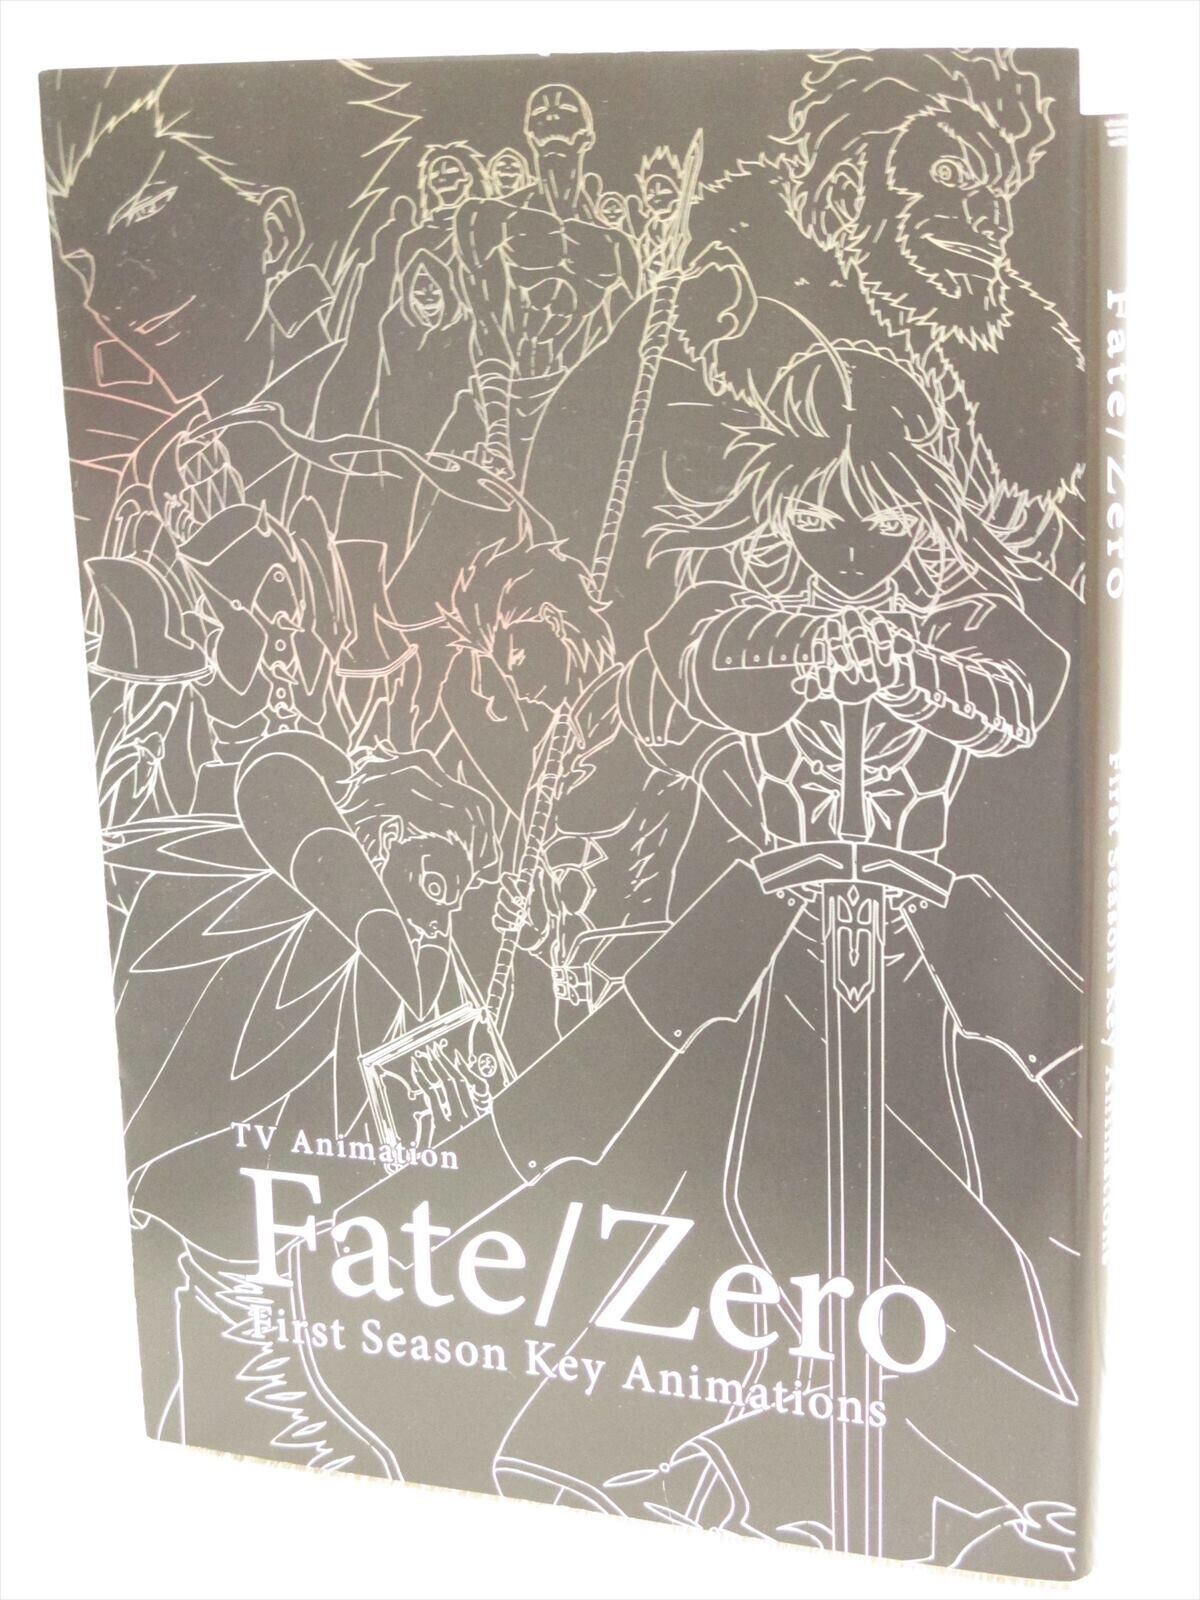 FATE ZERO First Season Key Animations Art Book Model Sheet 2012 See Condition